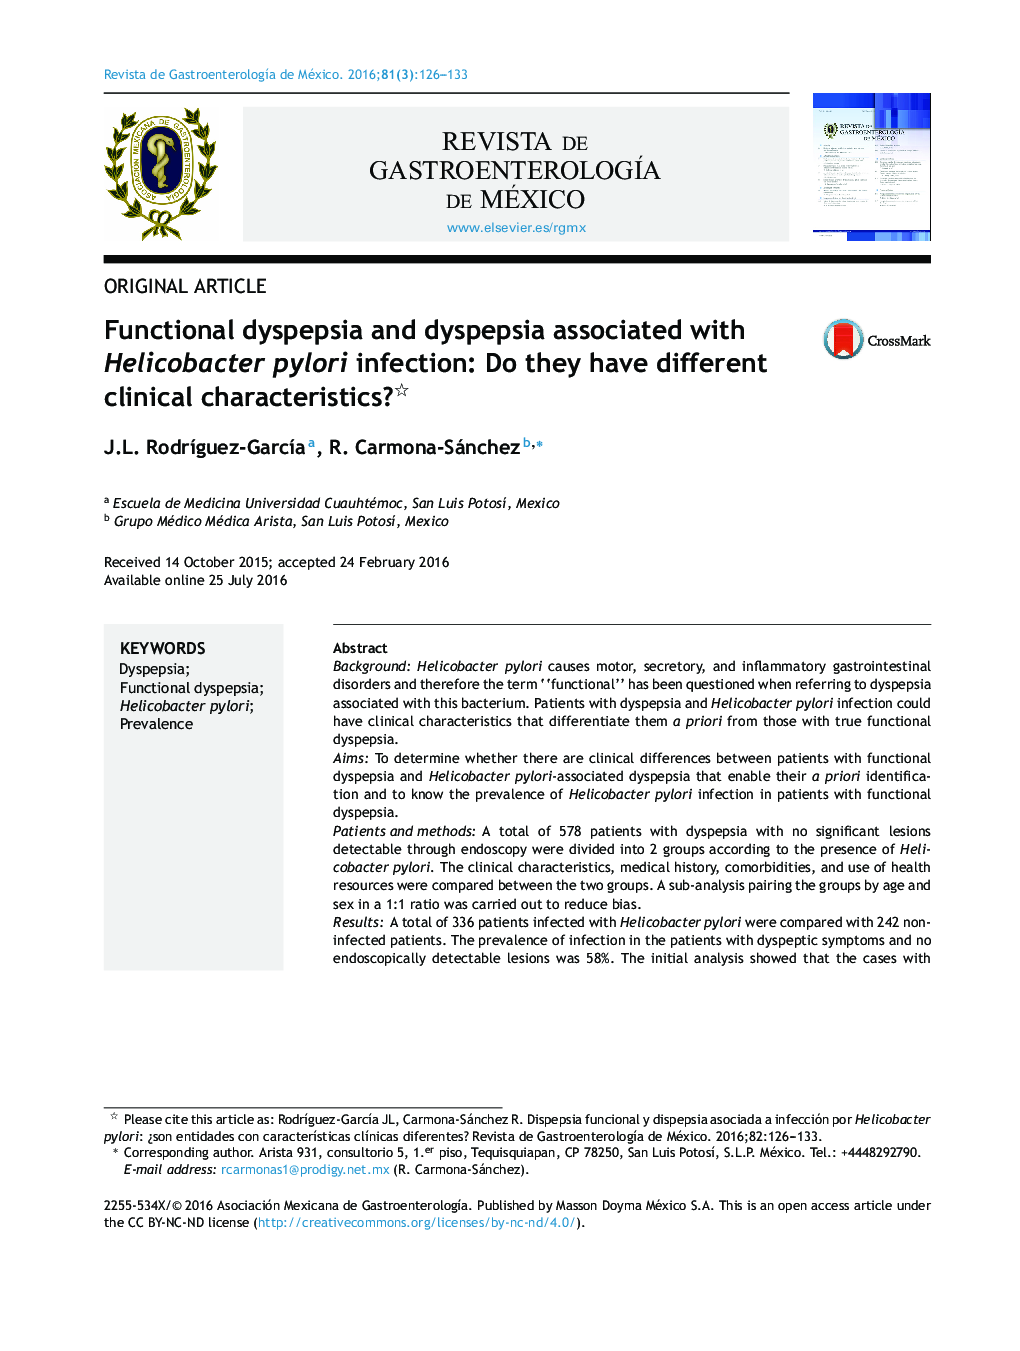 Functional dyspepsia and dyspepsia associated with Helicobacter pylori infection: Do they have different clinical characteristics? 